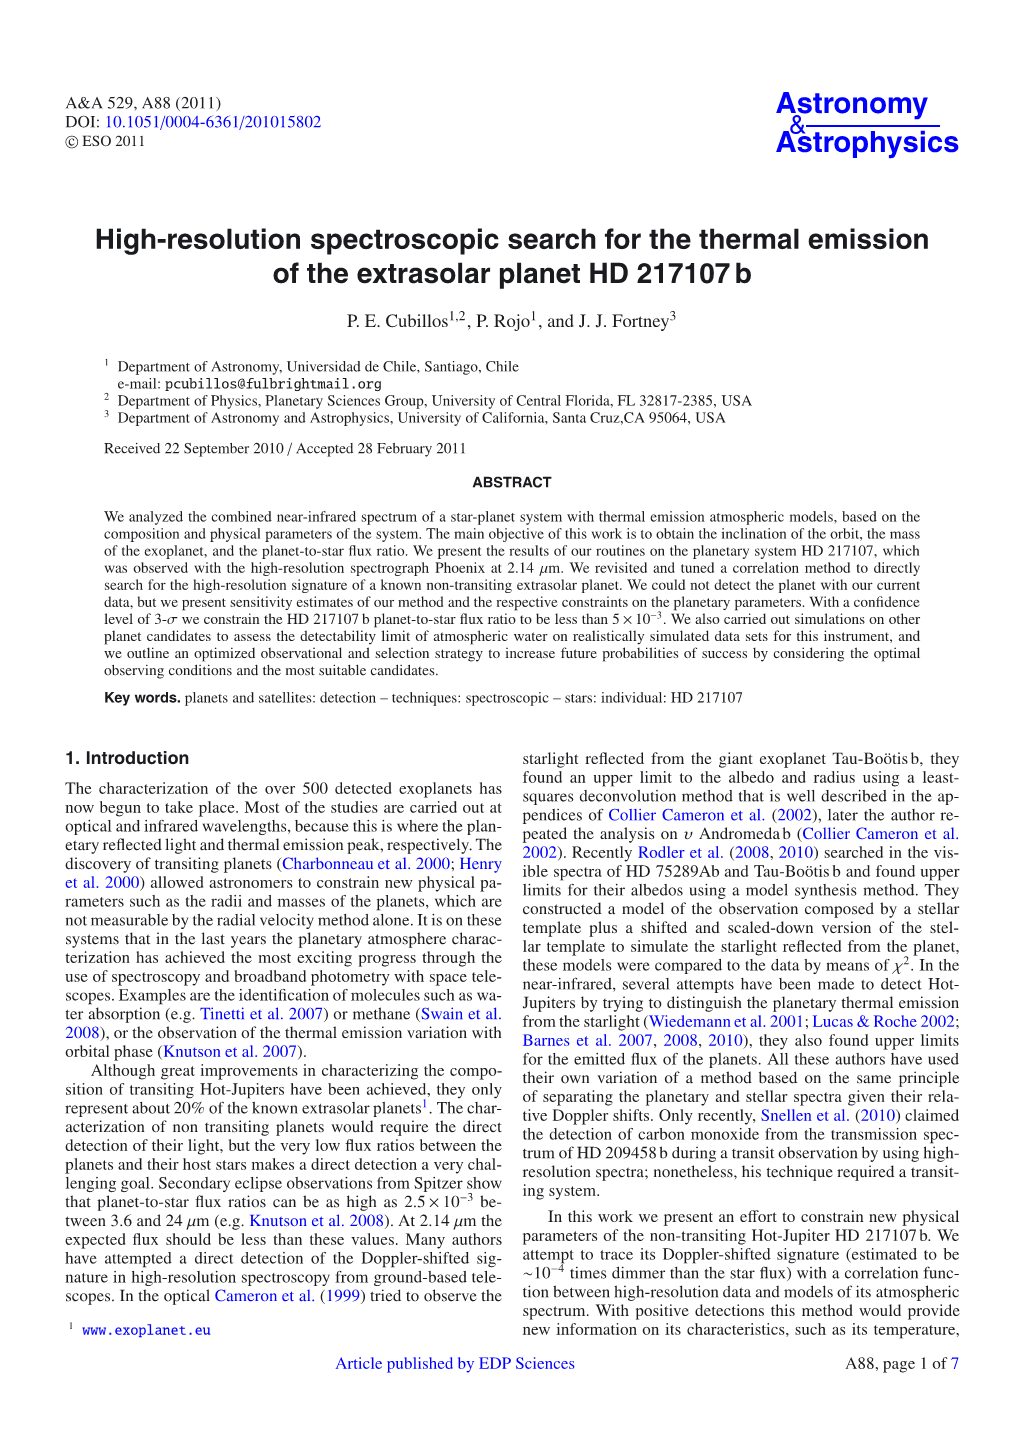 High-Resolution Spectroscopic Search for the Thermal Emission of the Extrasolar Planet HD 217107 B